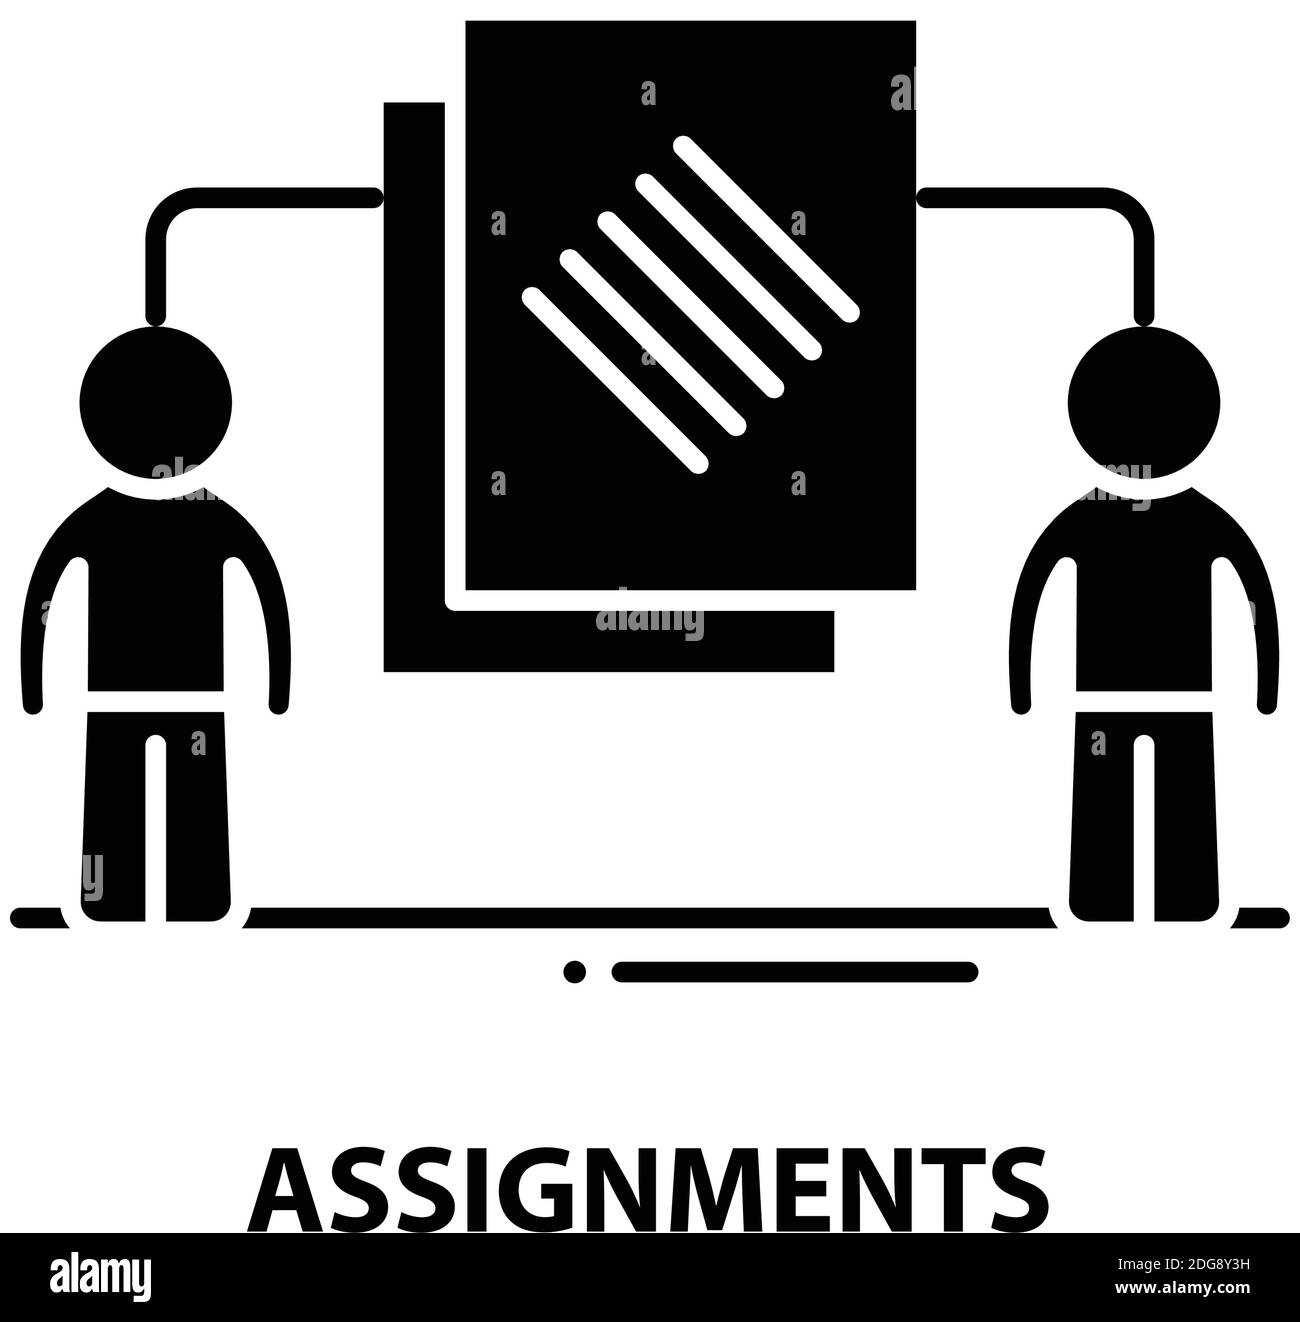 assignments icon, black vector sign with editable strokes, concept illustration Stock Vector